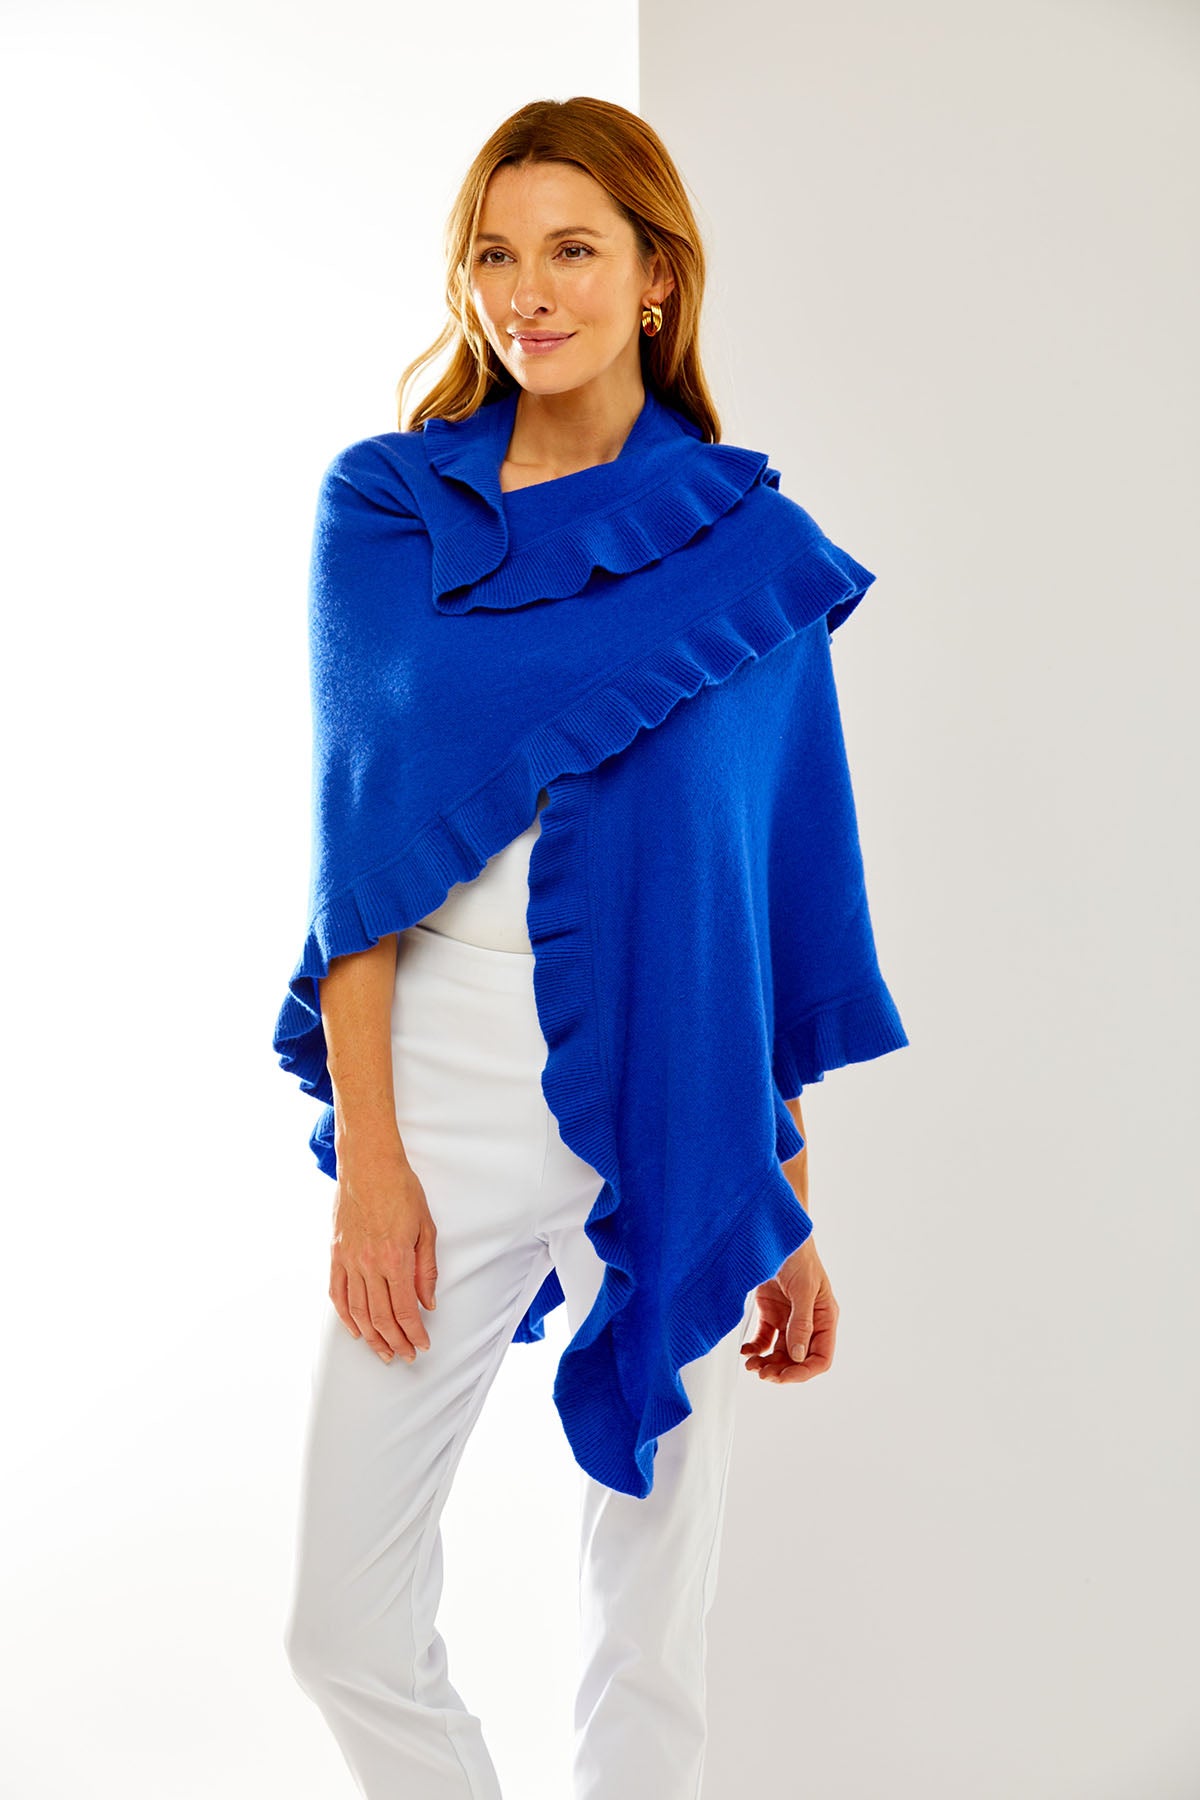 Marine Blue cashmere wrap with ruffle edge. Perfect for everyday wear and as a cocktail attire accessory